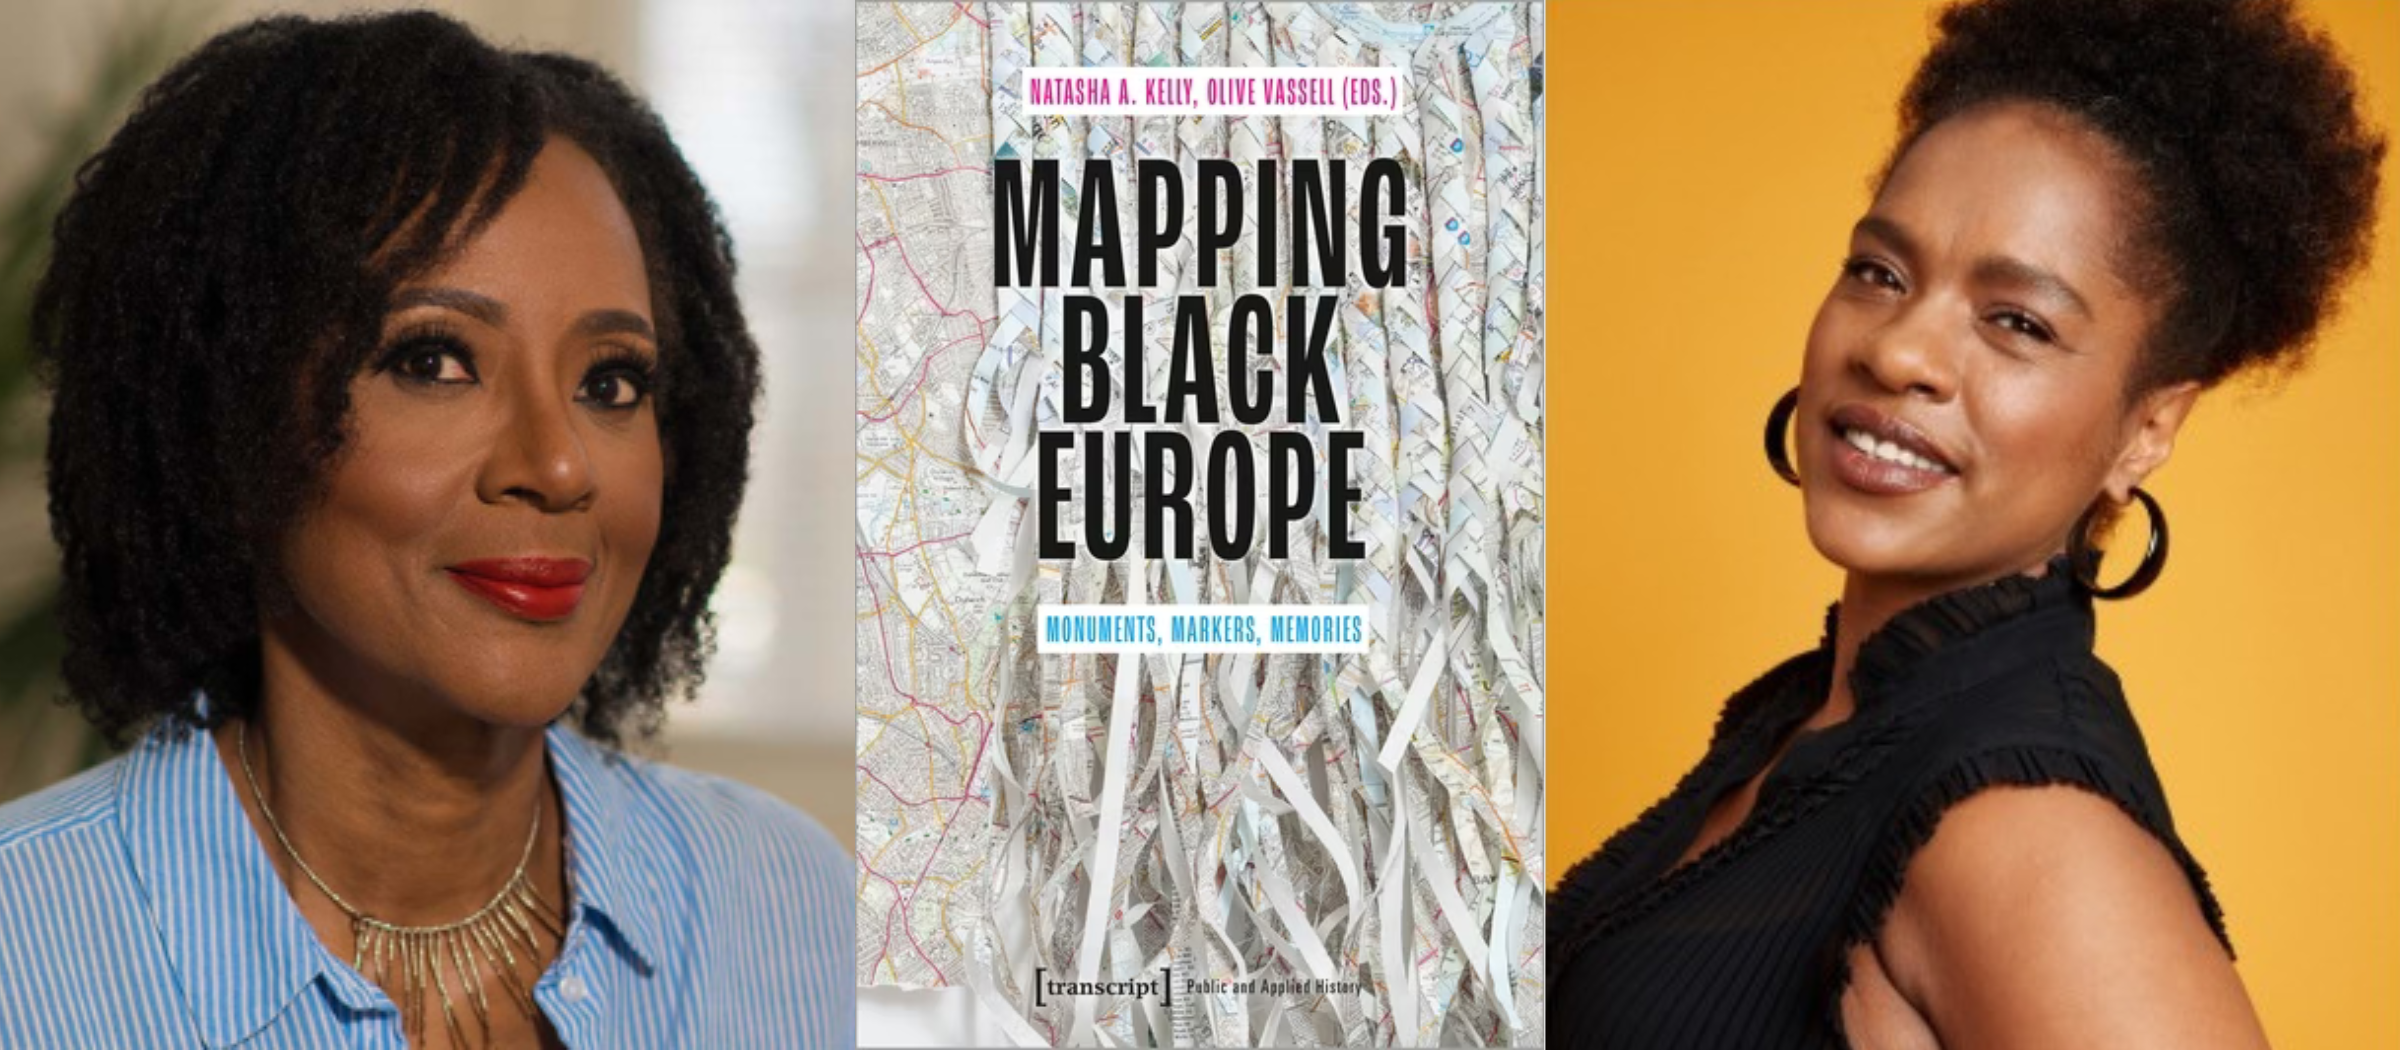 Professor secures grant for course based on book exploring Black contributions to European culture